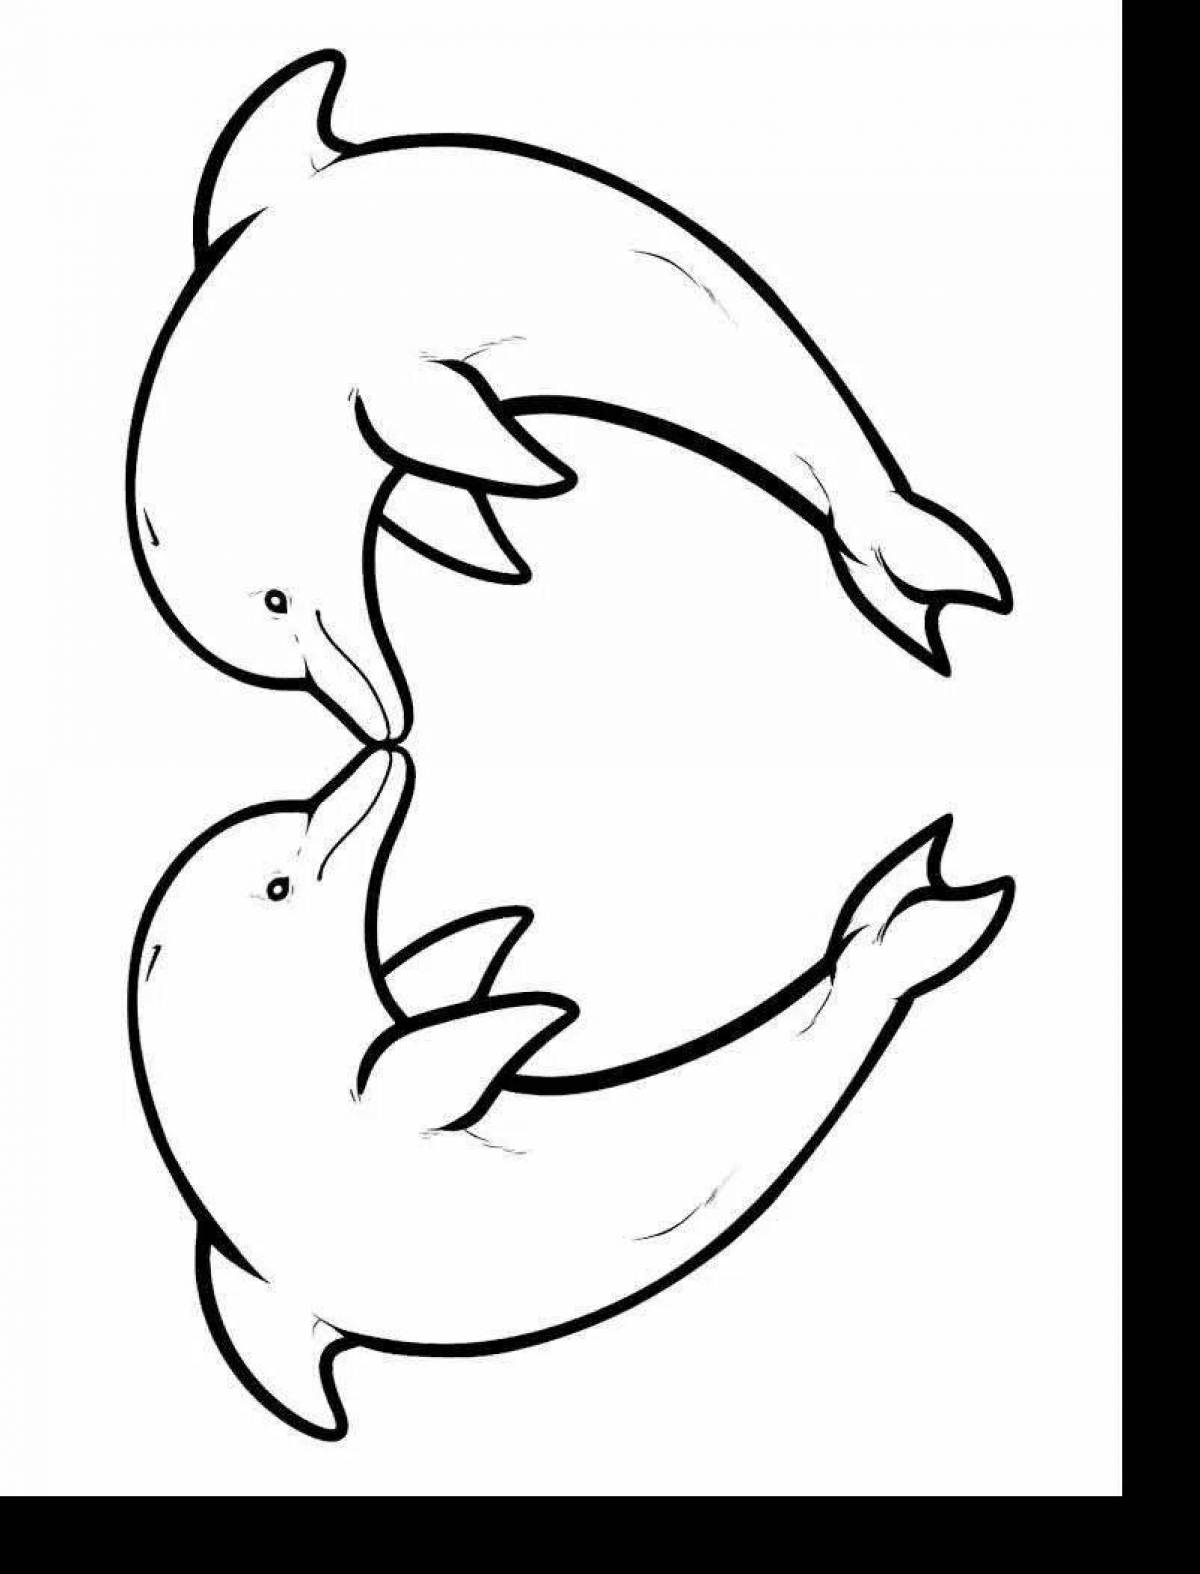 Animated dolphin coloring pages for kids